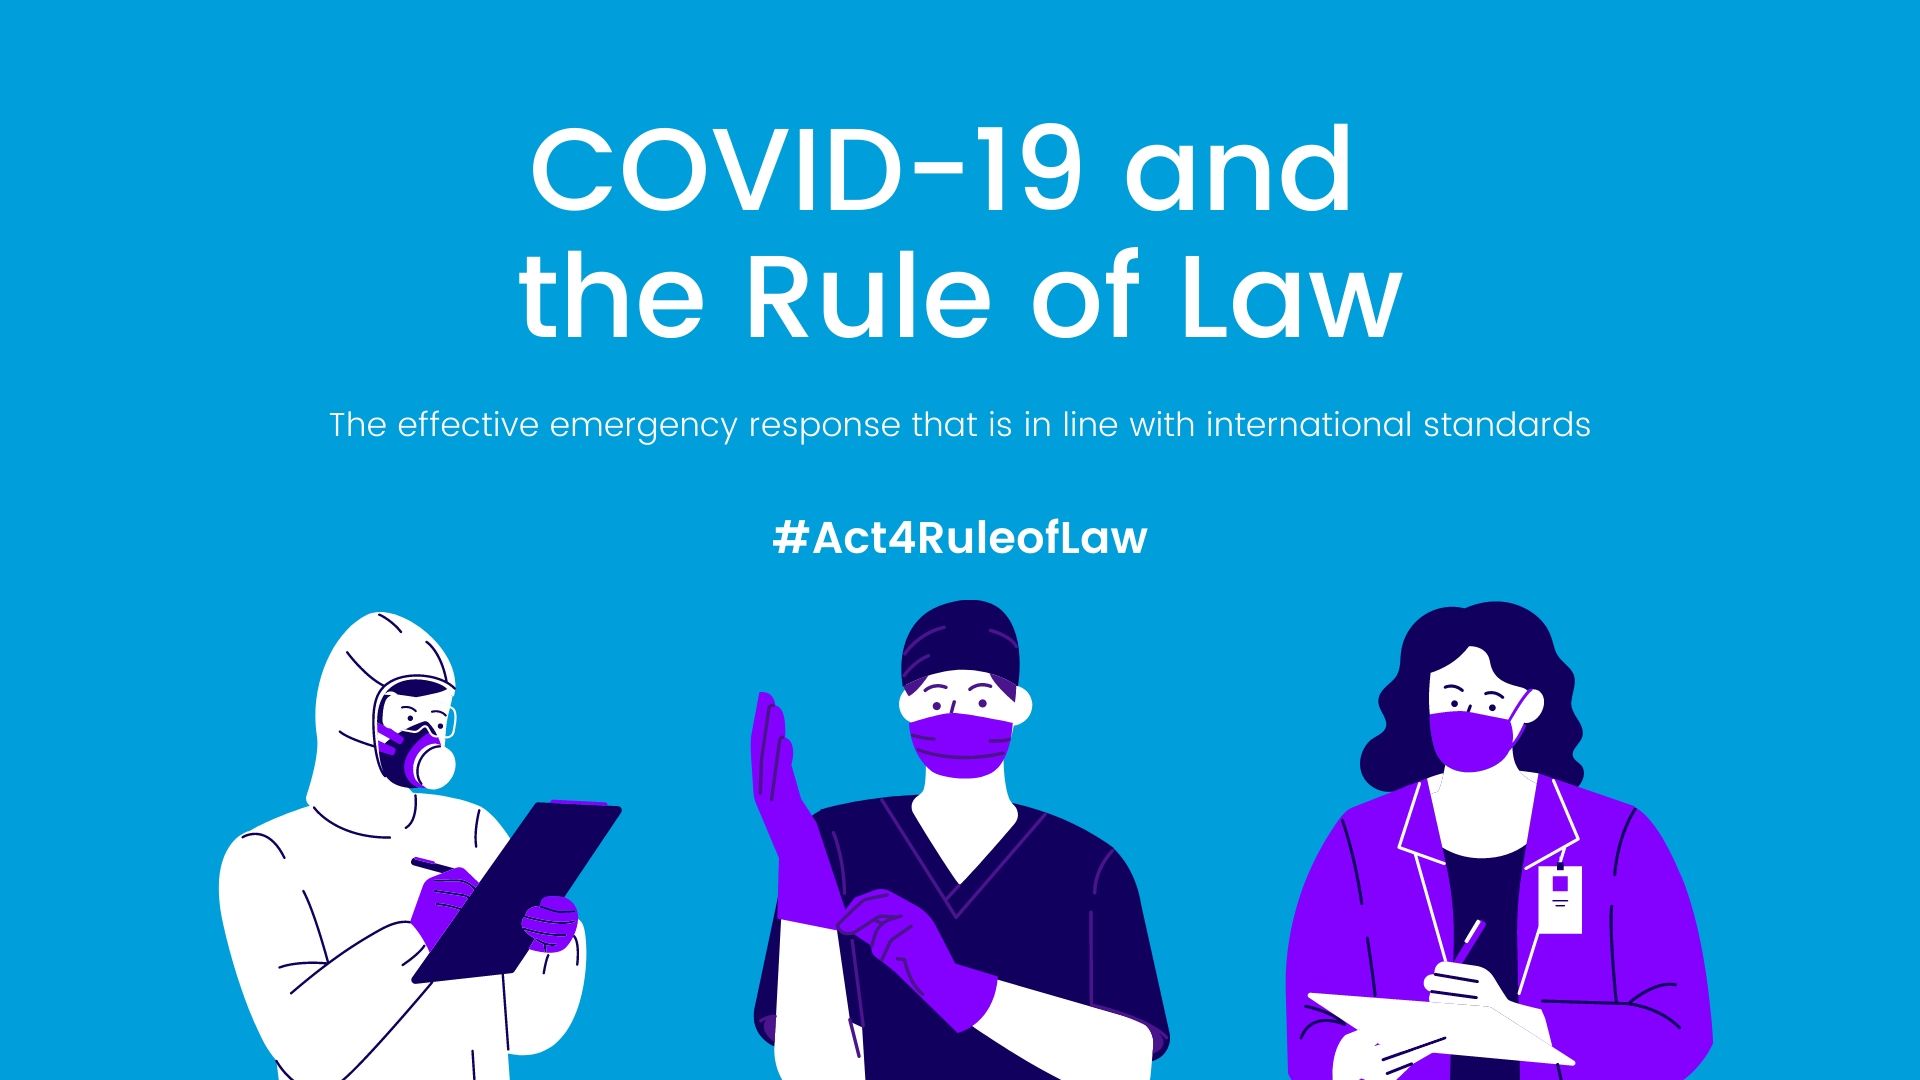 COVID-19 and the rule of law illustration